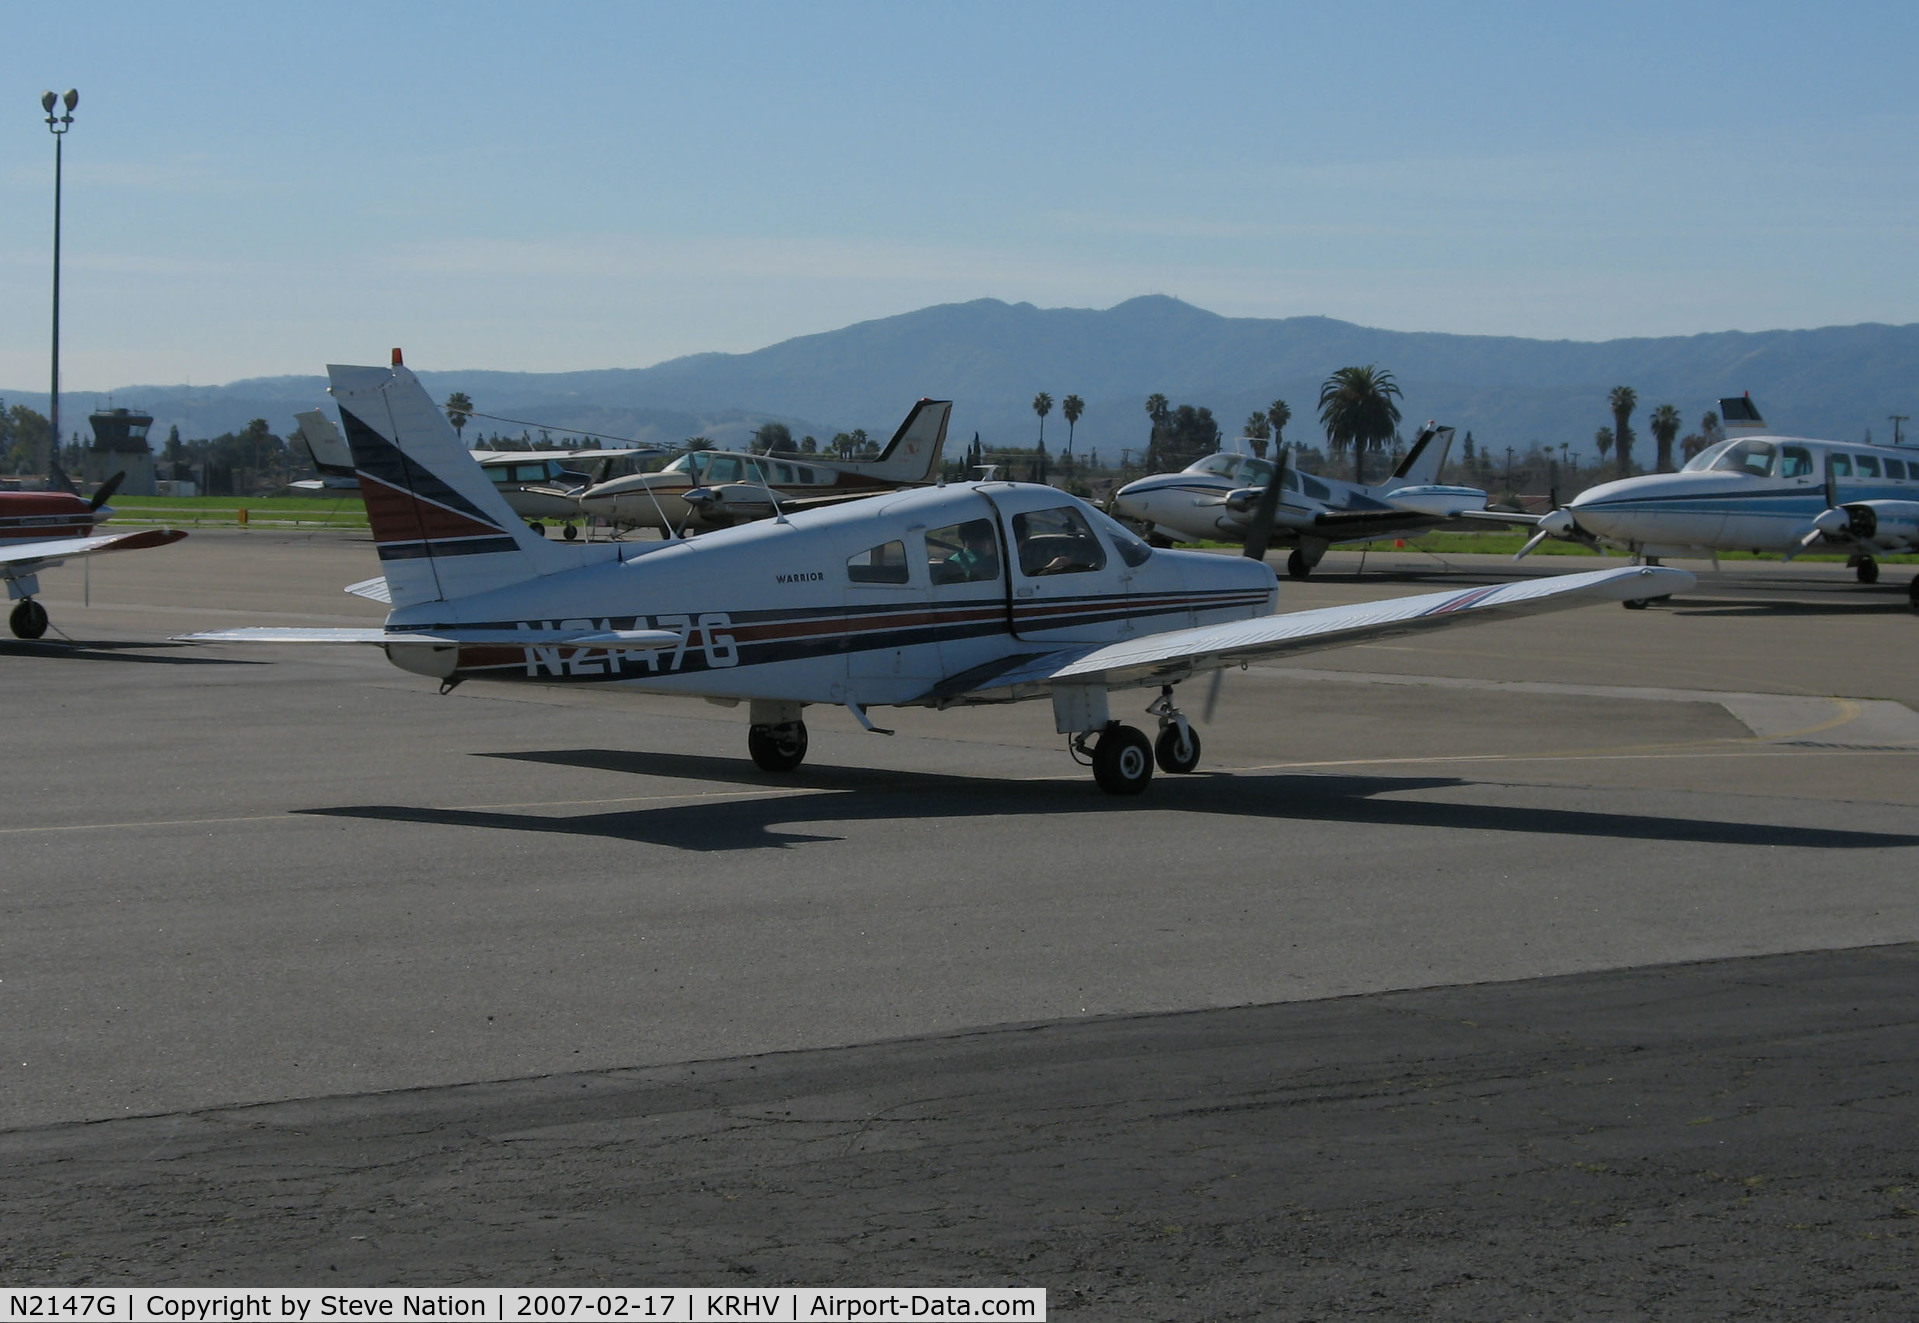 N2147G, 1978 Piper PA-28-161 C/N 28-7916178, Locally-based 1978 Piper PA-28-161 Cherokee taxiing @ Reid-Hillview Airport (San Jose), CA